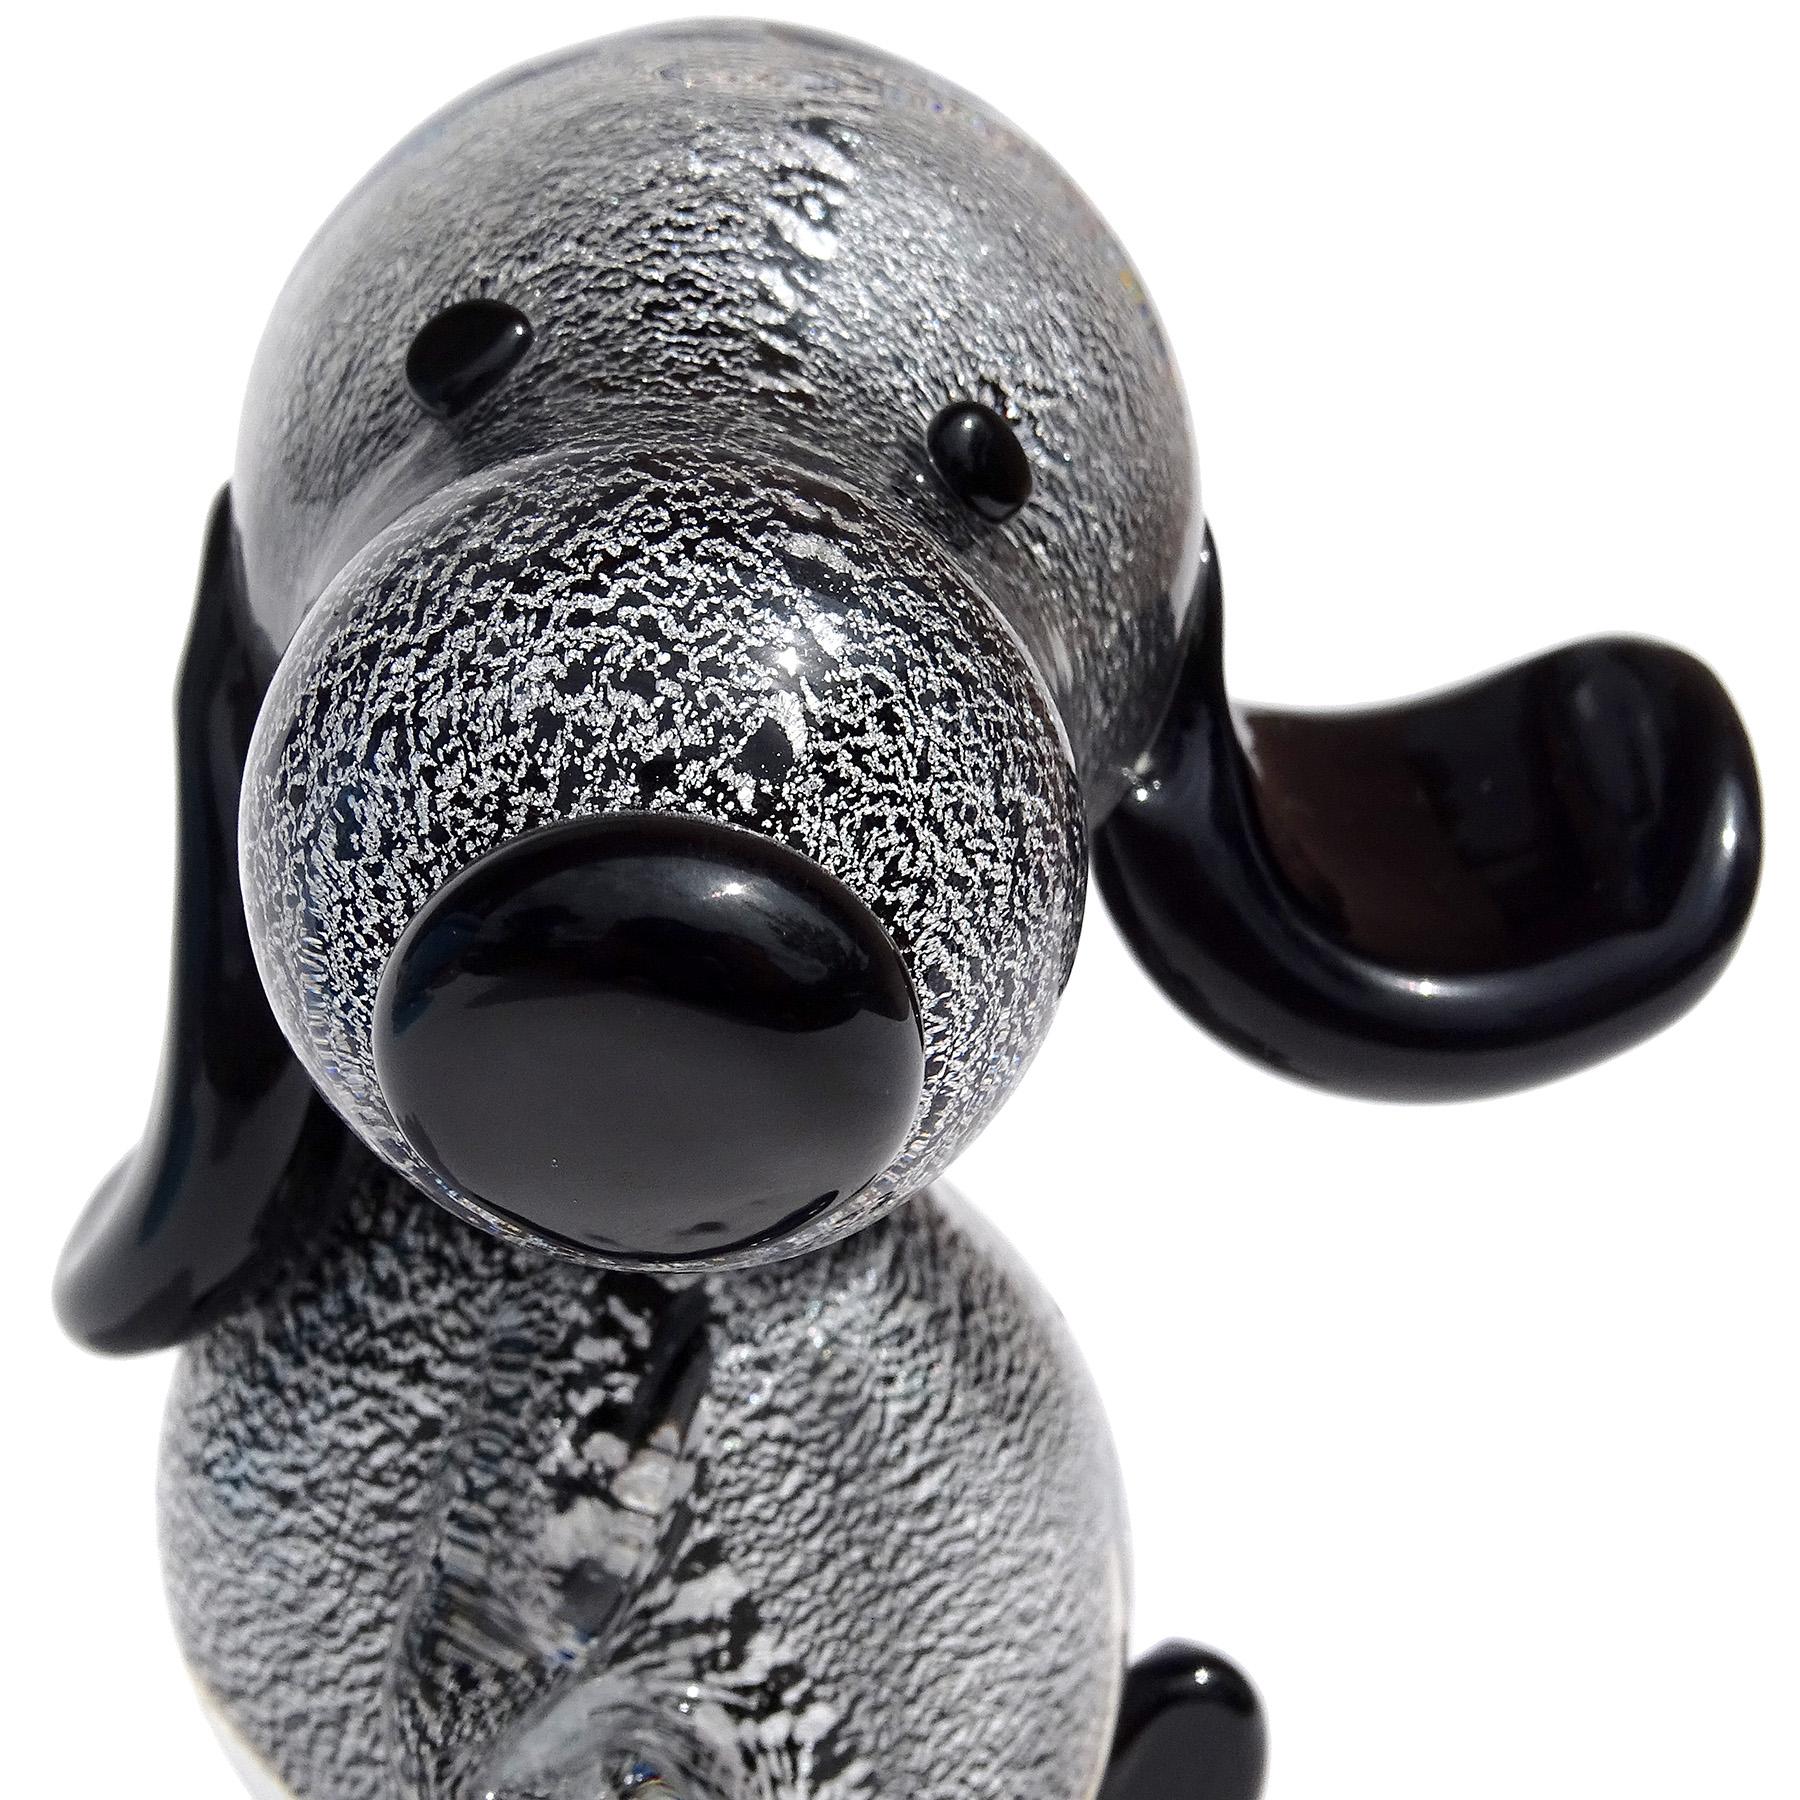 Beautiful vintage Murano hand blown black and silver flecks Italian art glass Snoopy puppy dog sculpture / figure. Attributed to the Gambaro & Poggi workshops. The piece is super cute, with tilted head and long floppy ears, one of which is flopping